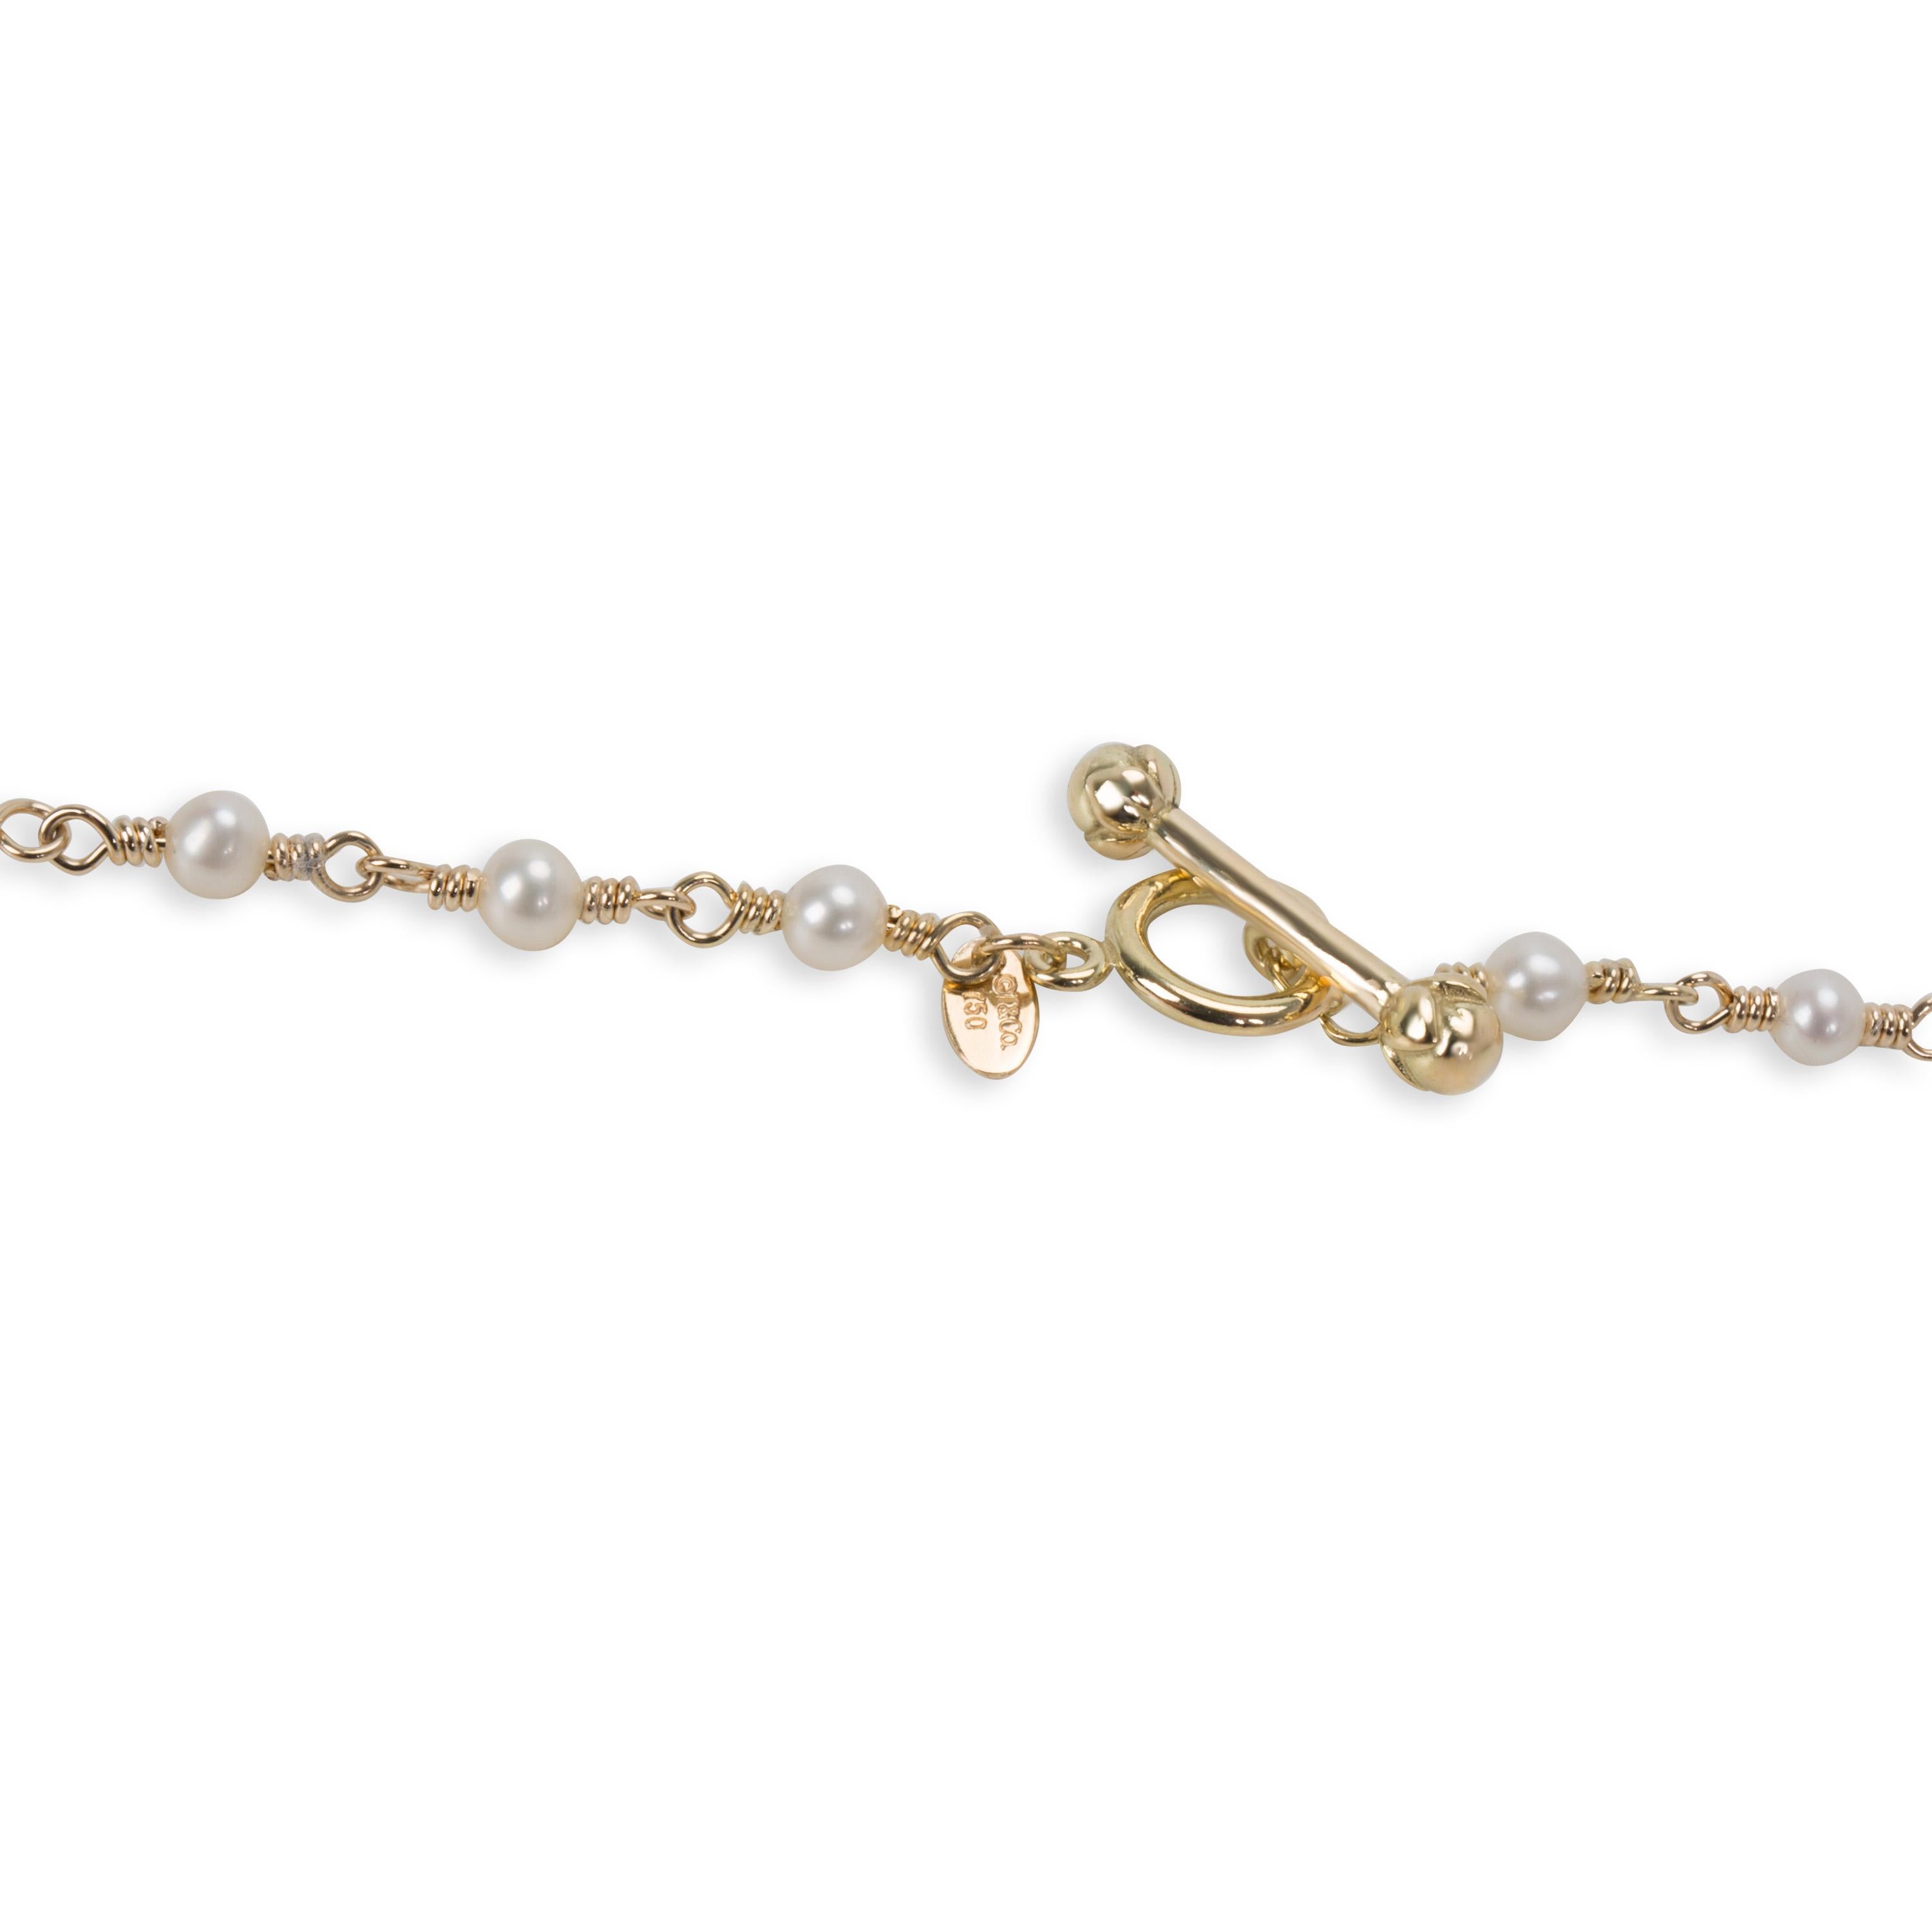 Women's Tiffany & Co. Pearl Necklace in 18 Karat Yellow Gold